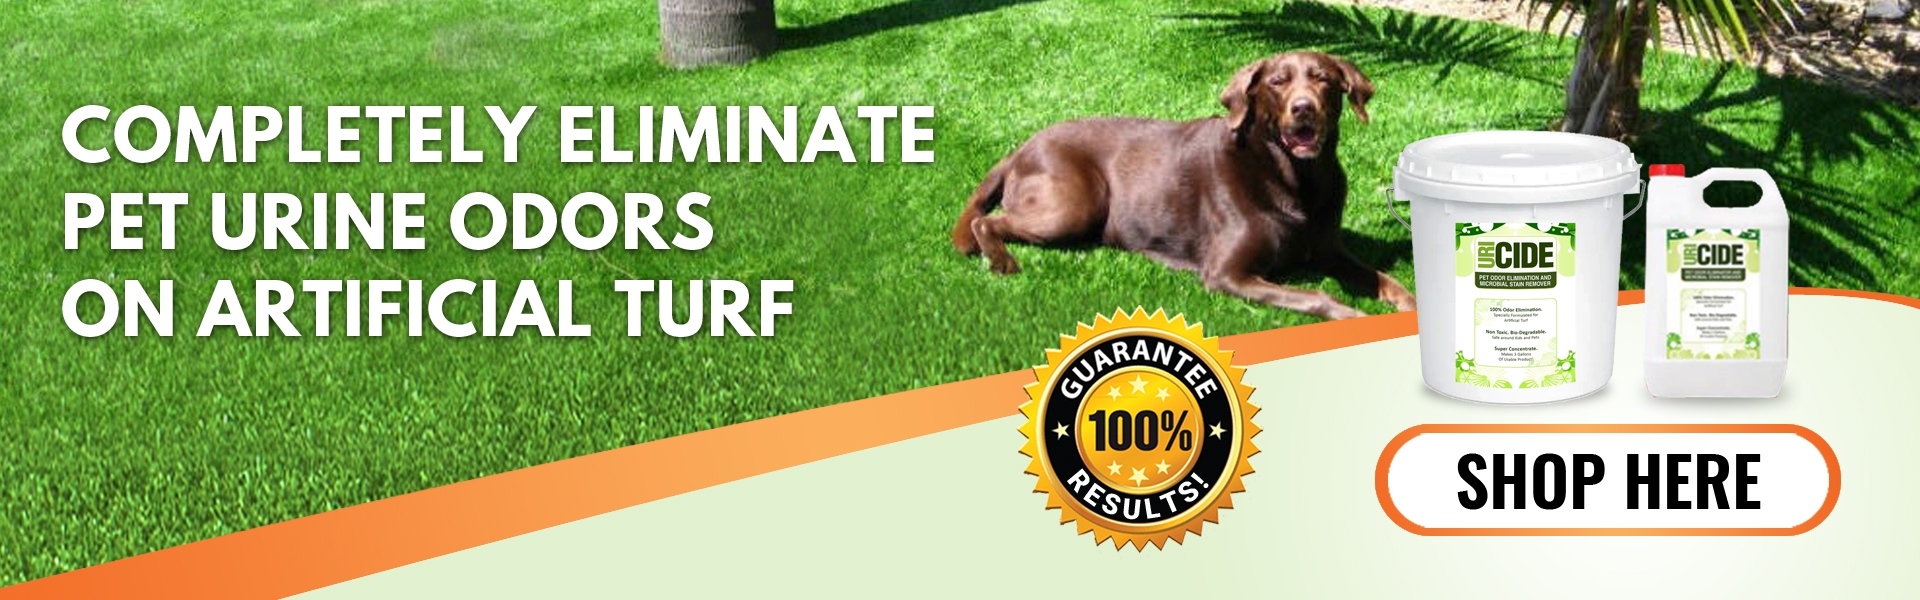 Eliminate dog odors from artificial turf lawn